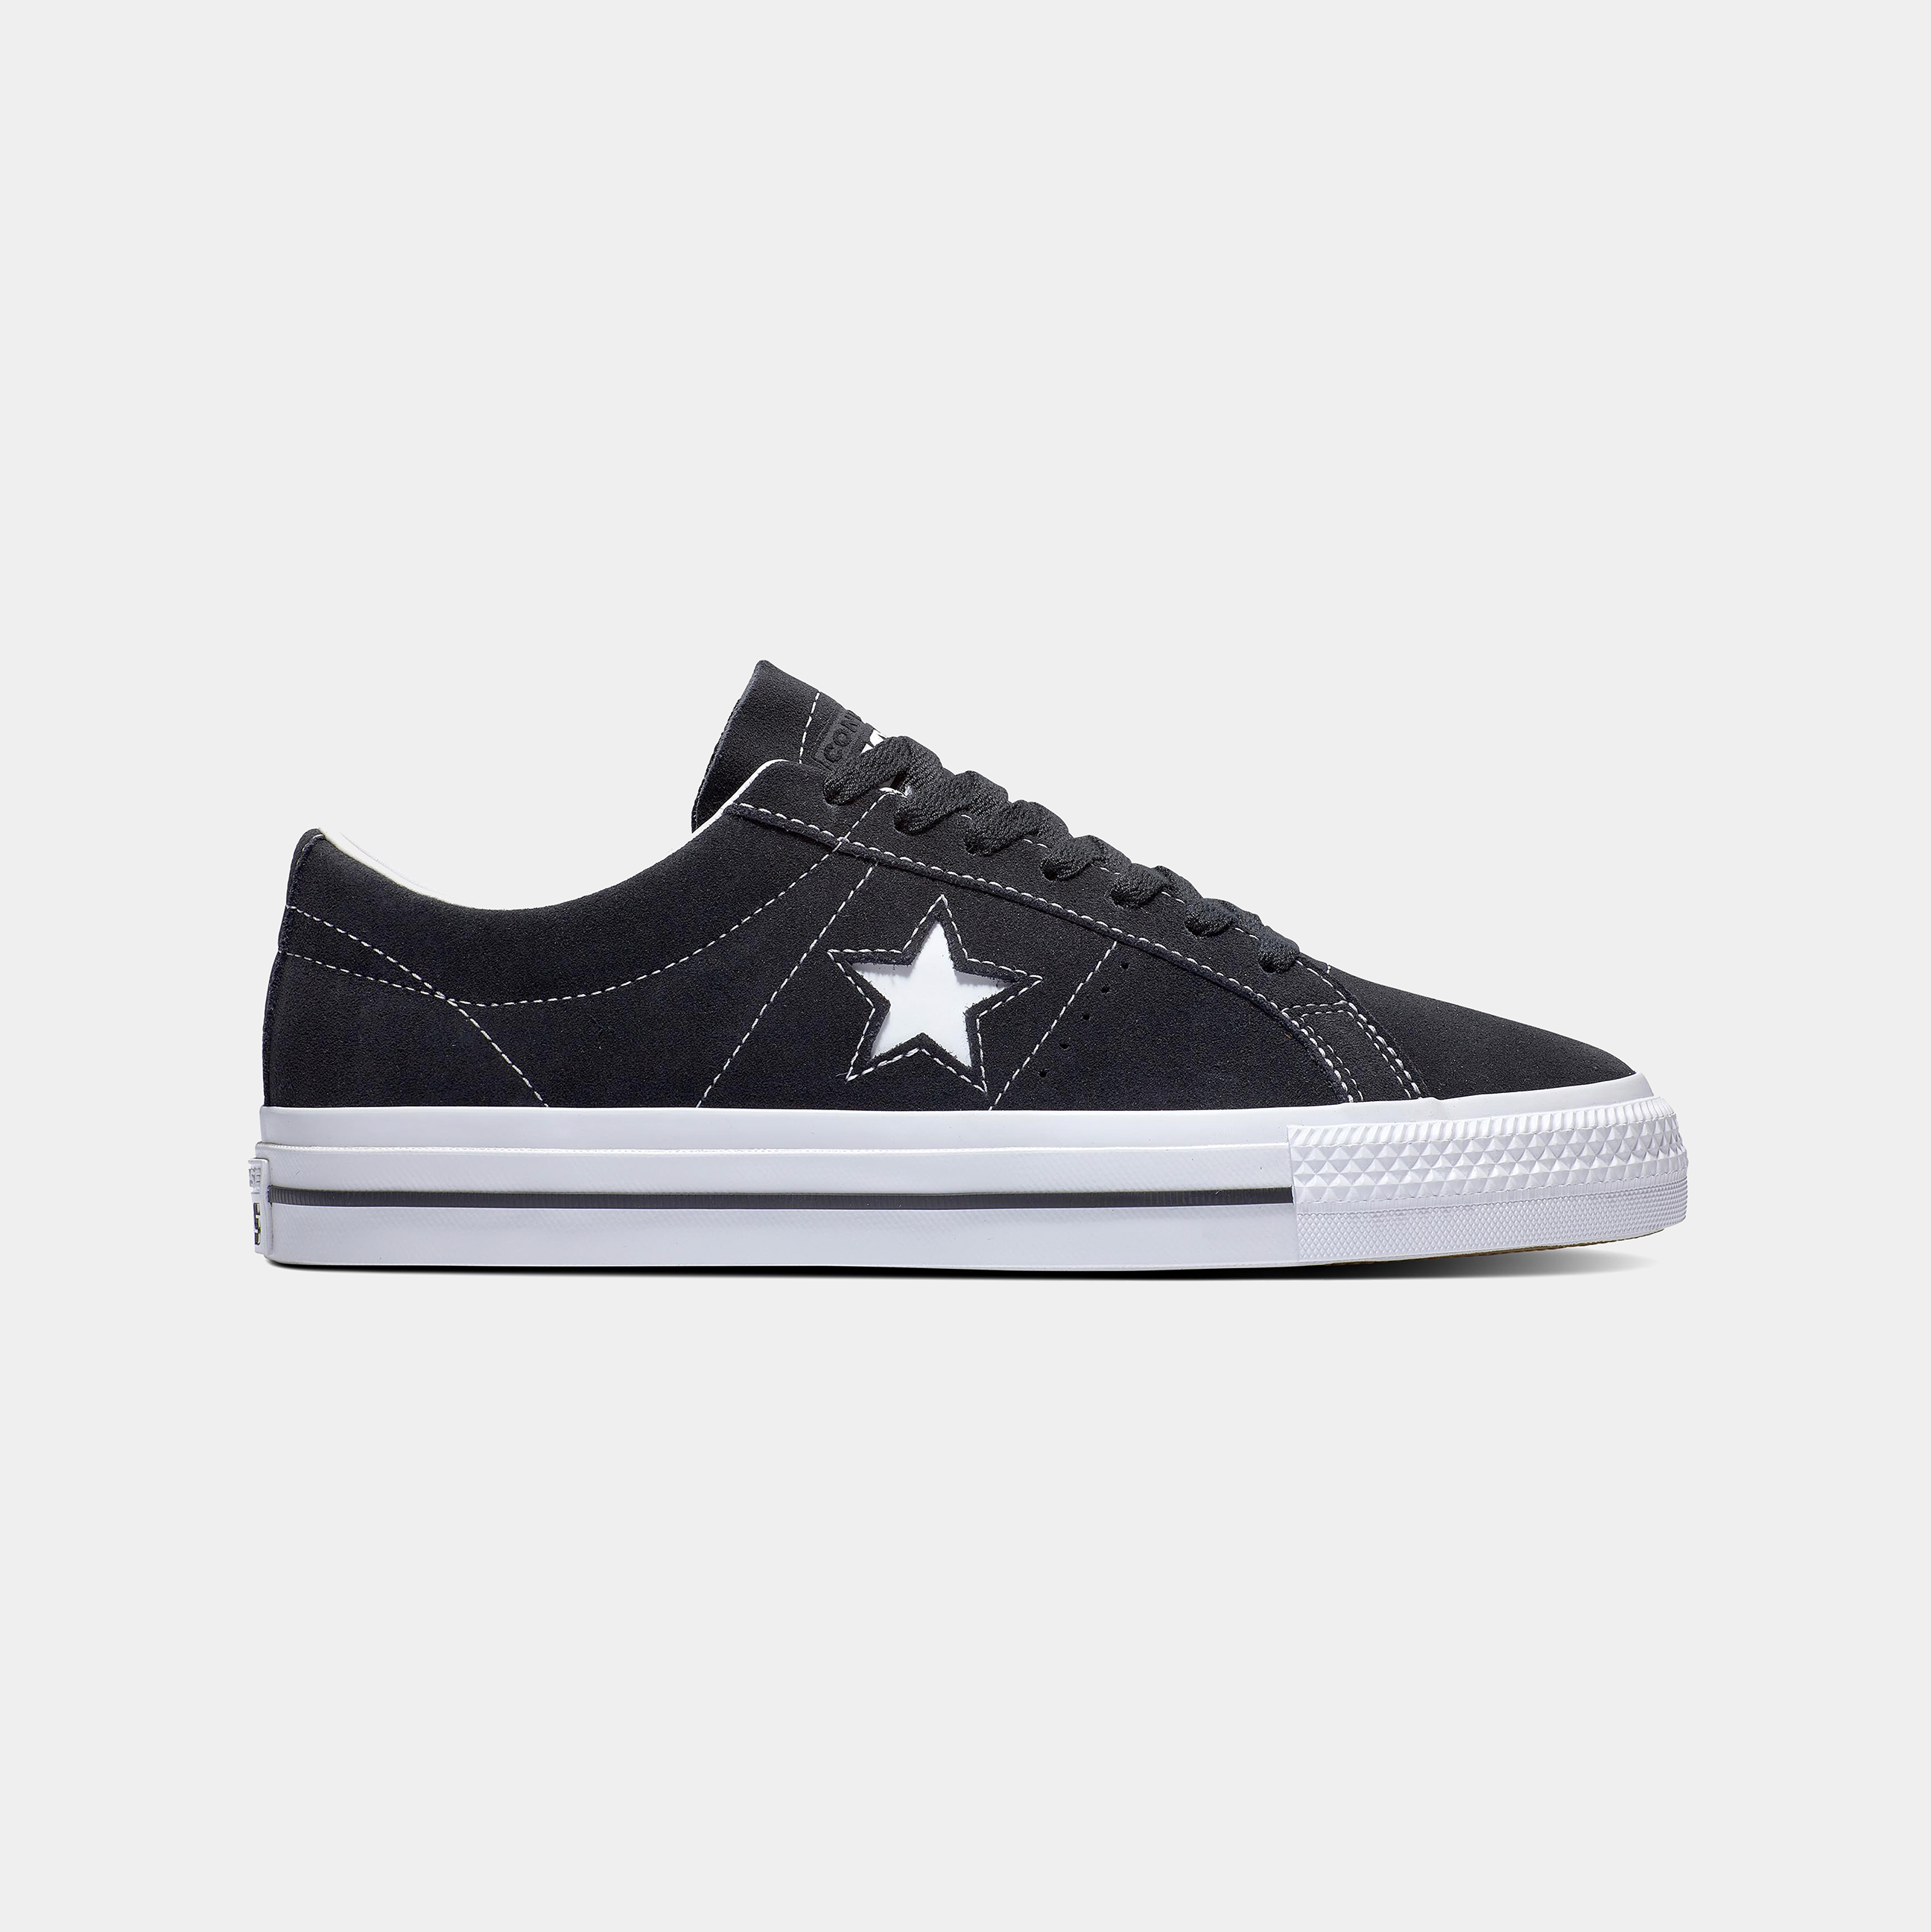 Nysgerrighed Polering by CONVERSE ONE STAR PRO OX - BLACK/WHITE 159579C - PLA Skateboarding